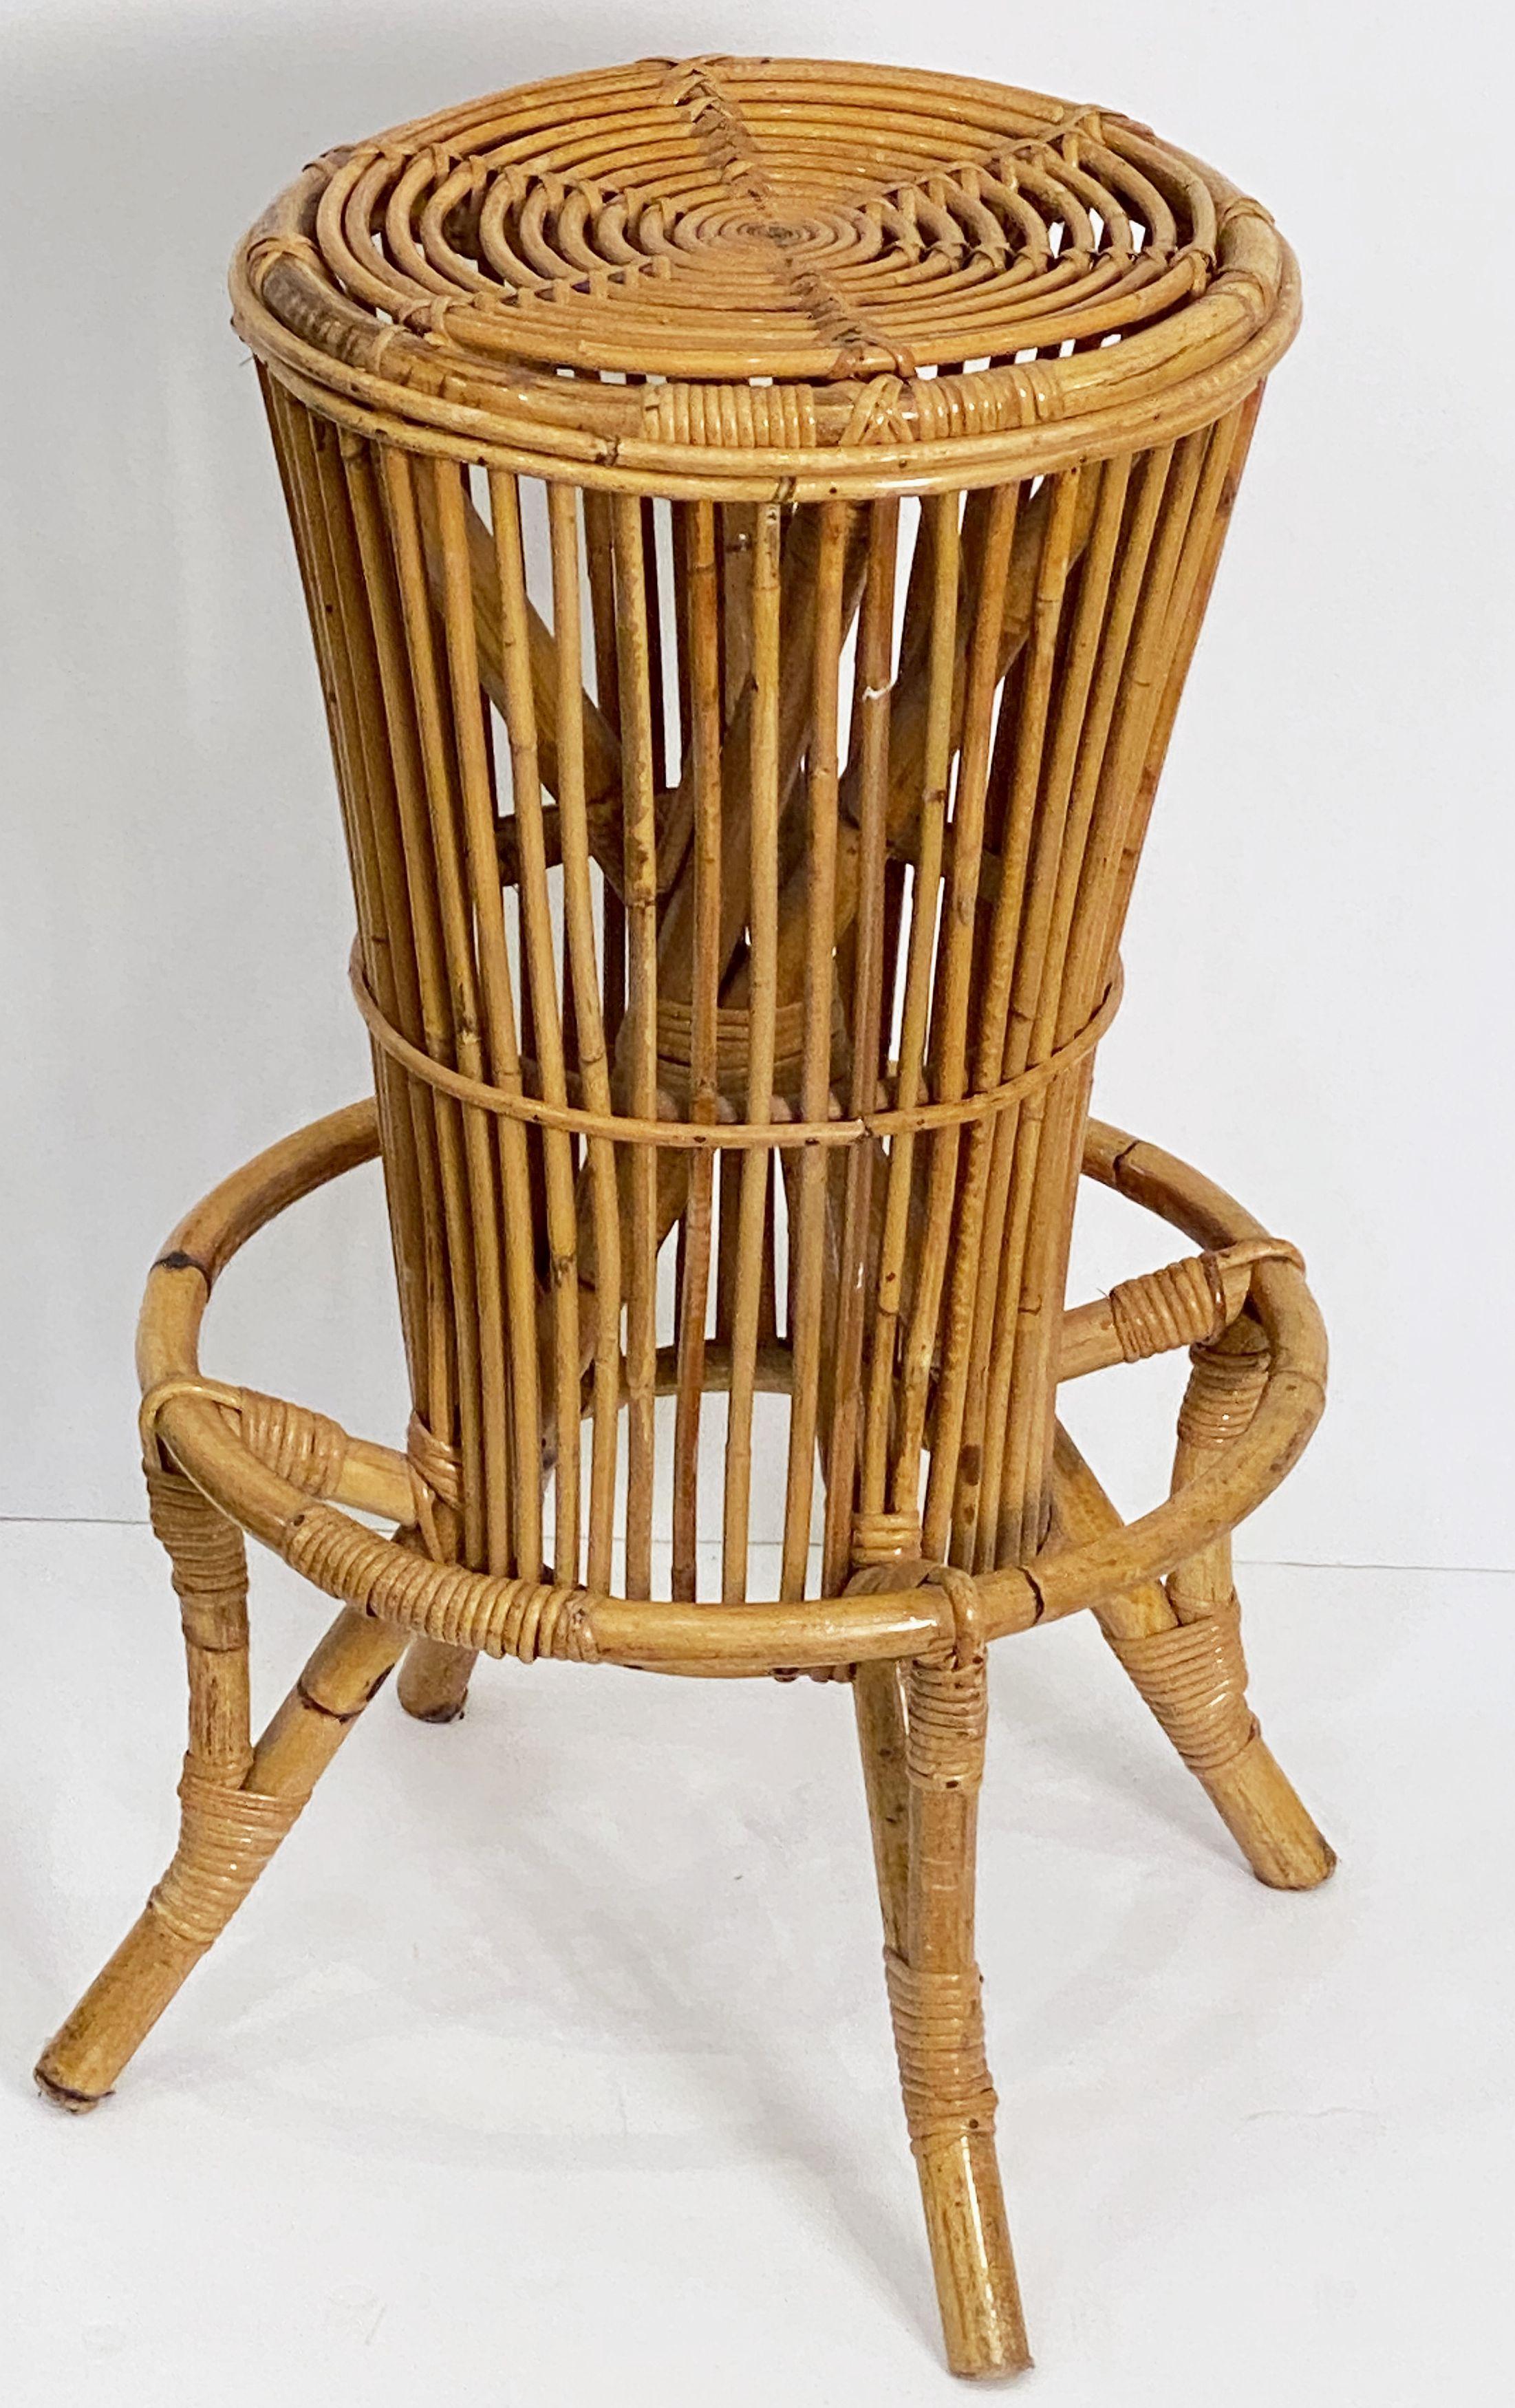 Italian Stool of Rattan and Bamboo from the Mid-20th Century For Sale 15